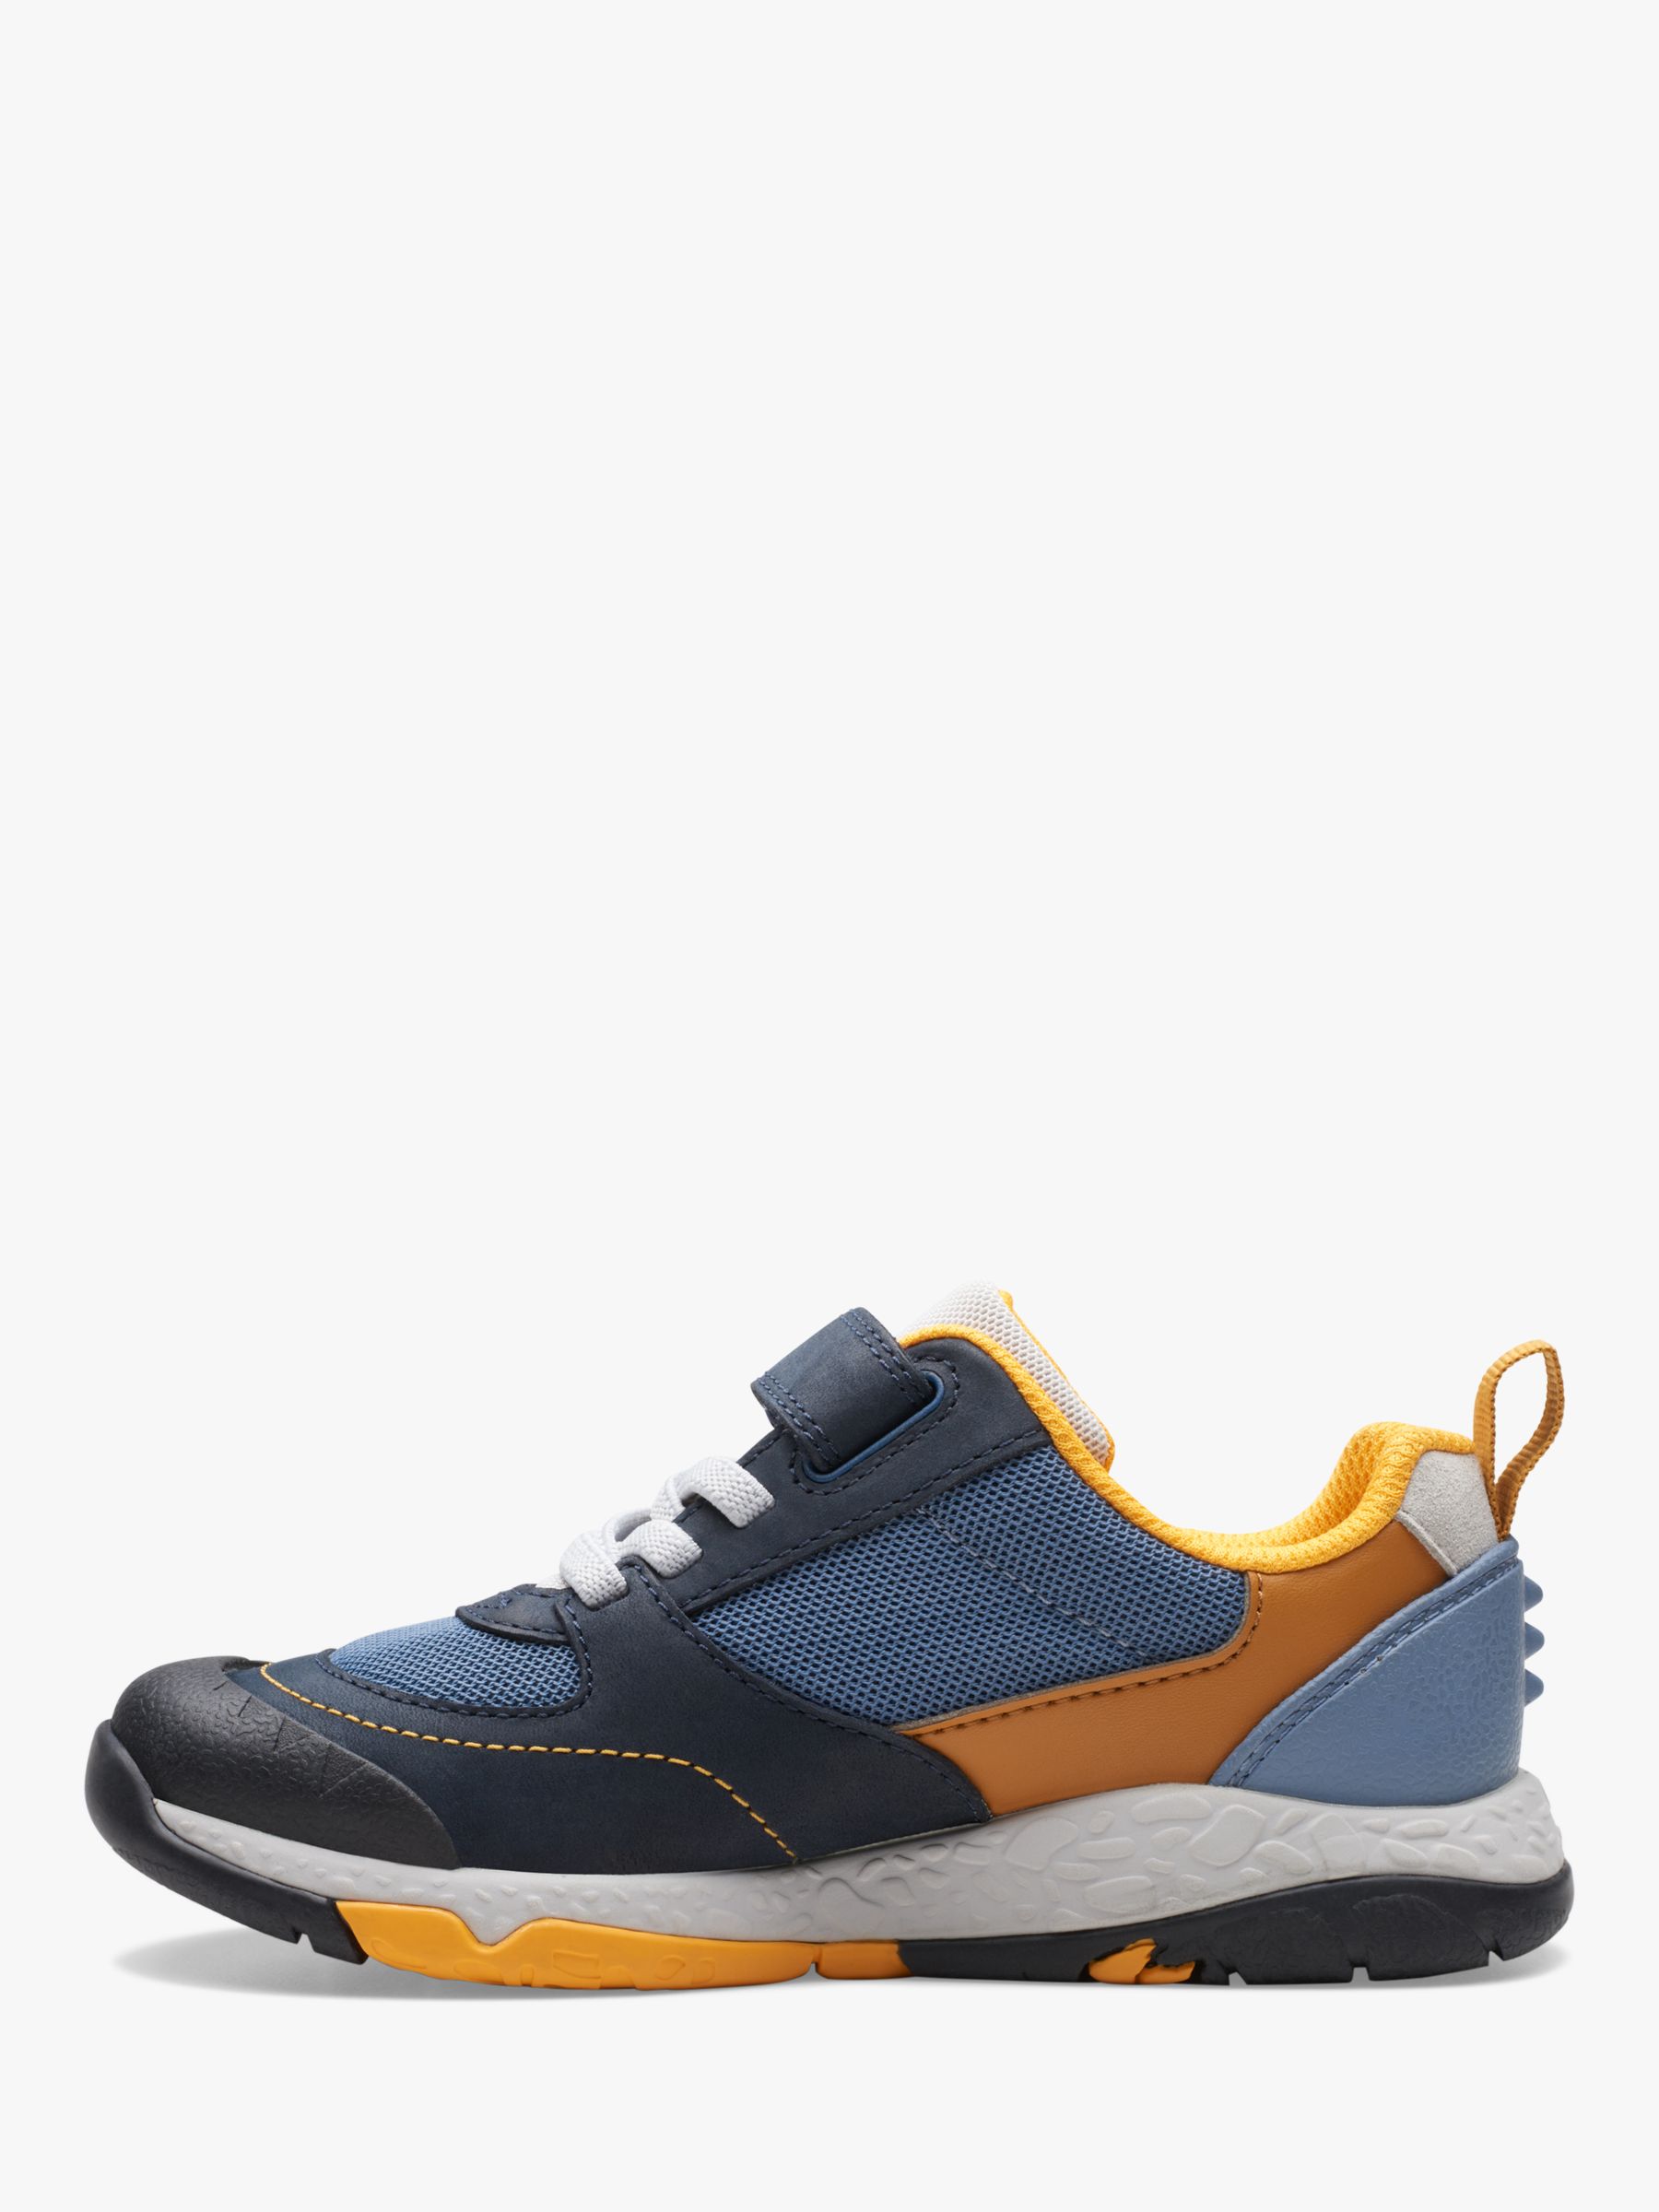 Clarks Kids' Steggy Stride Leather Shoes, Navy/multi at John Lewis ...